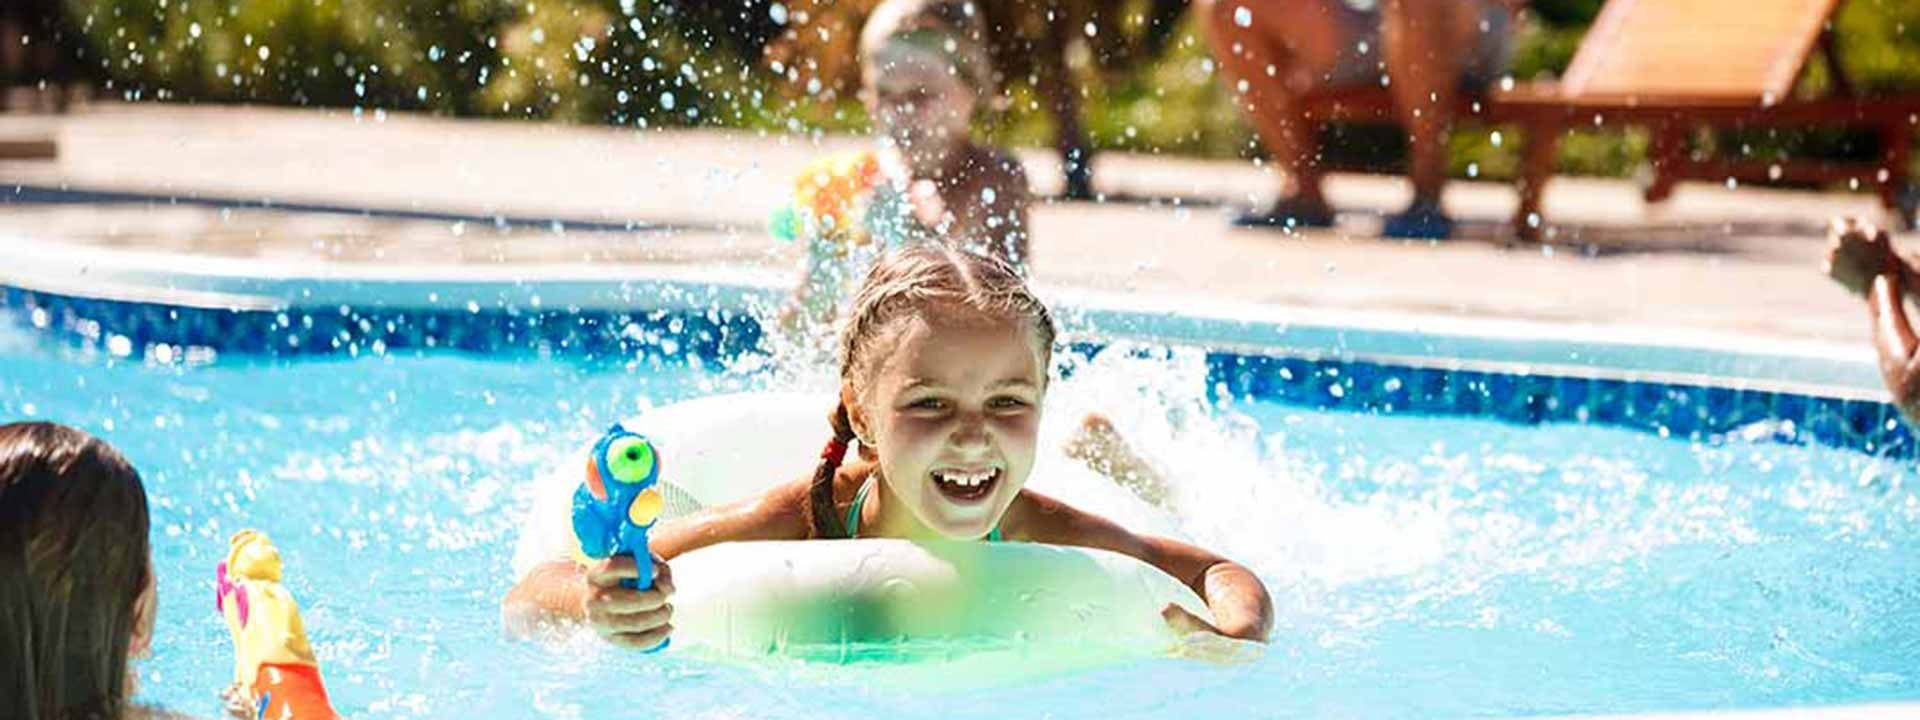 The Must-Have Pool Accessories for Your Community